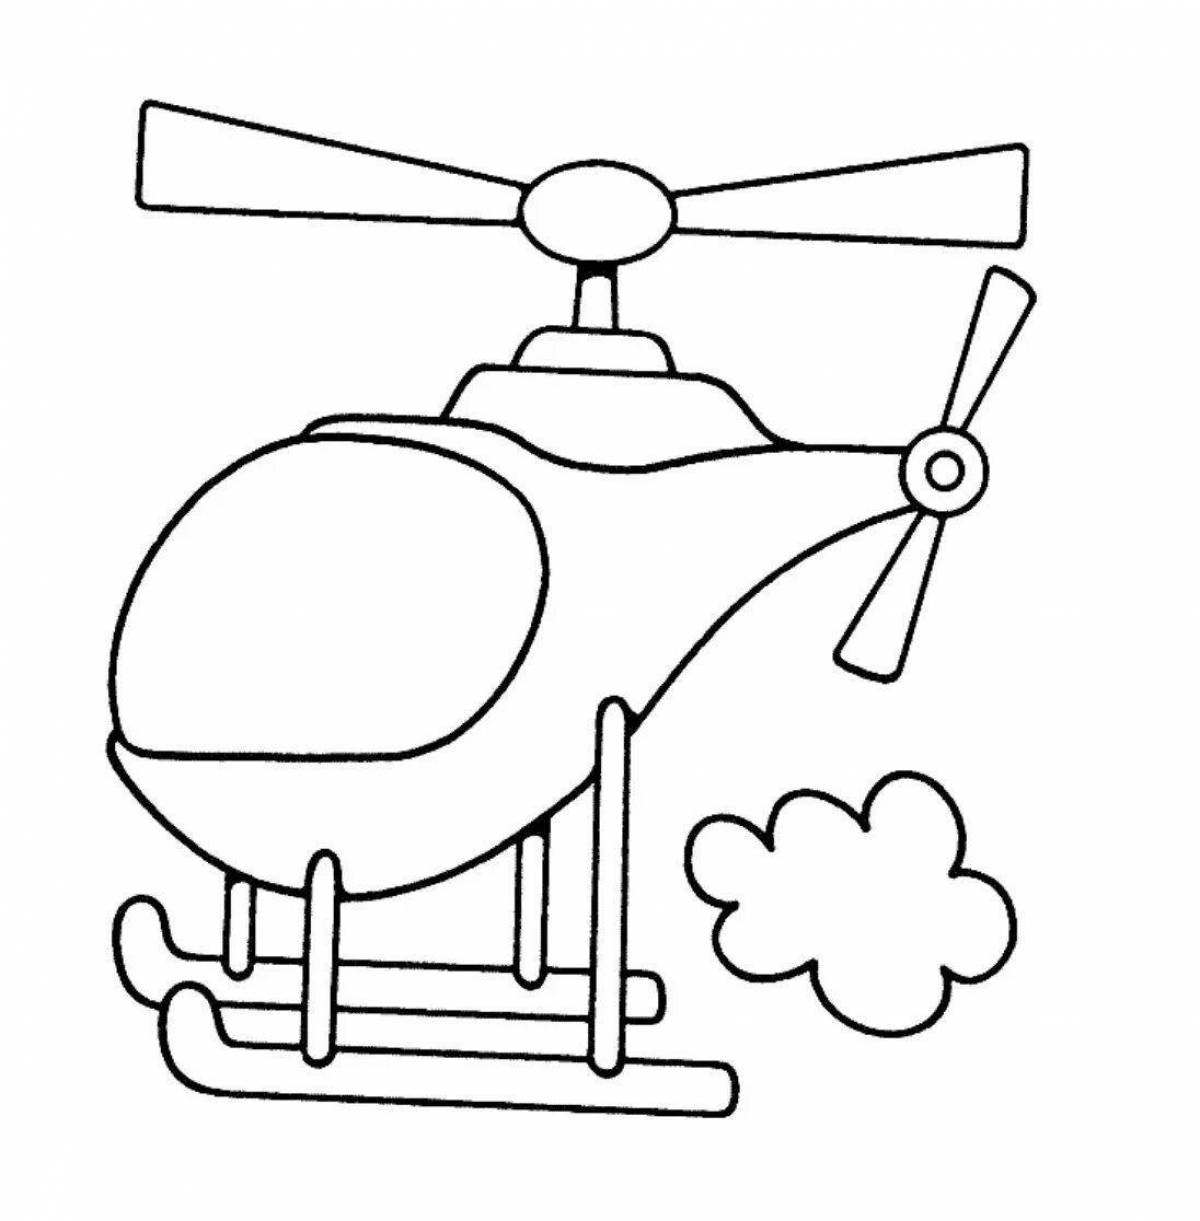 Baby helicopter #12